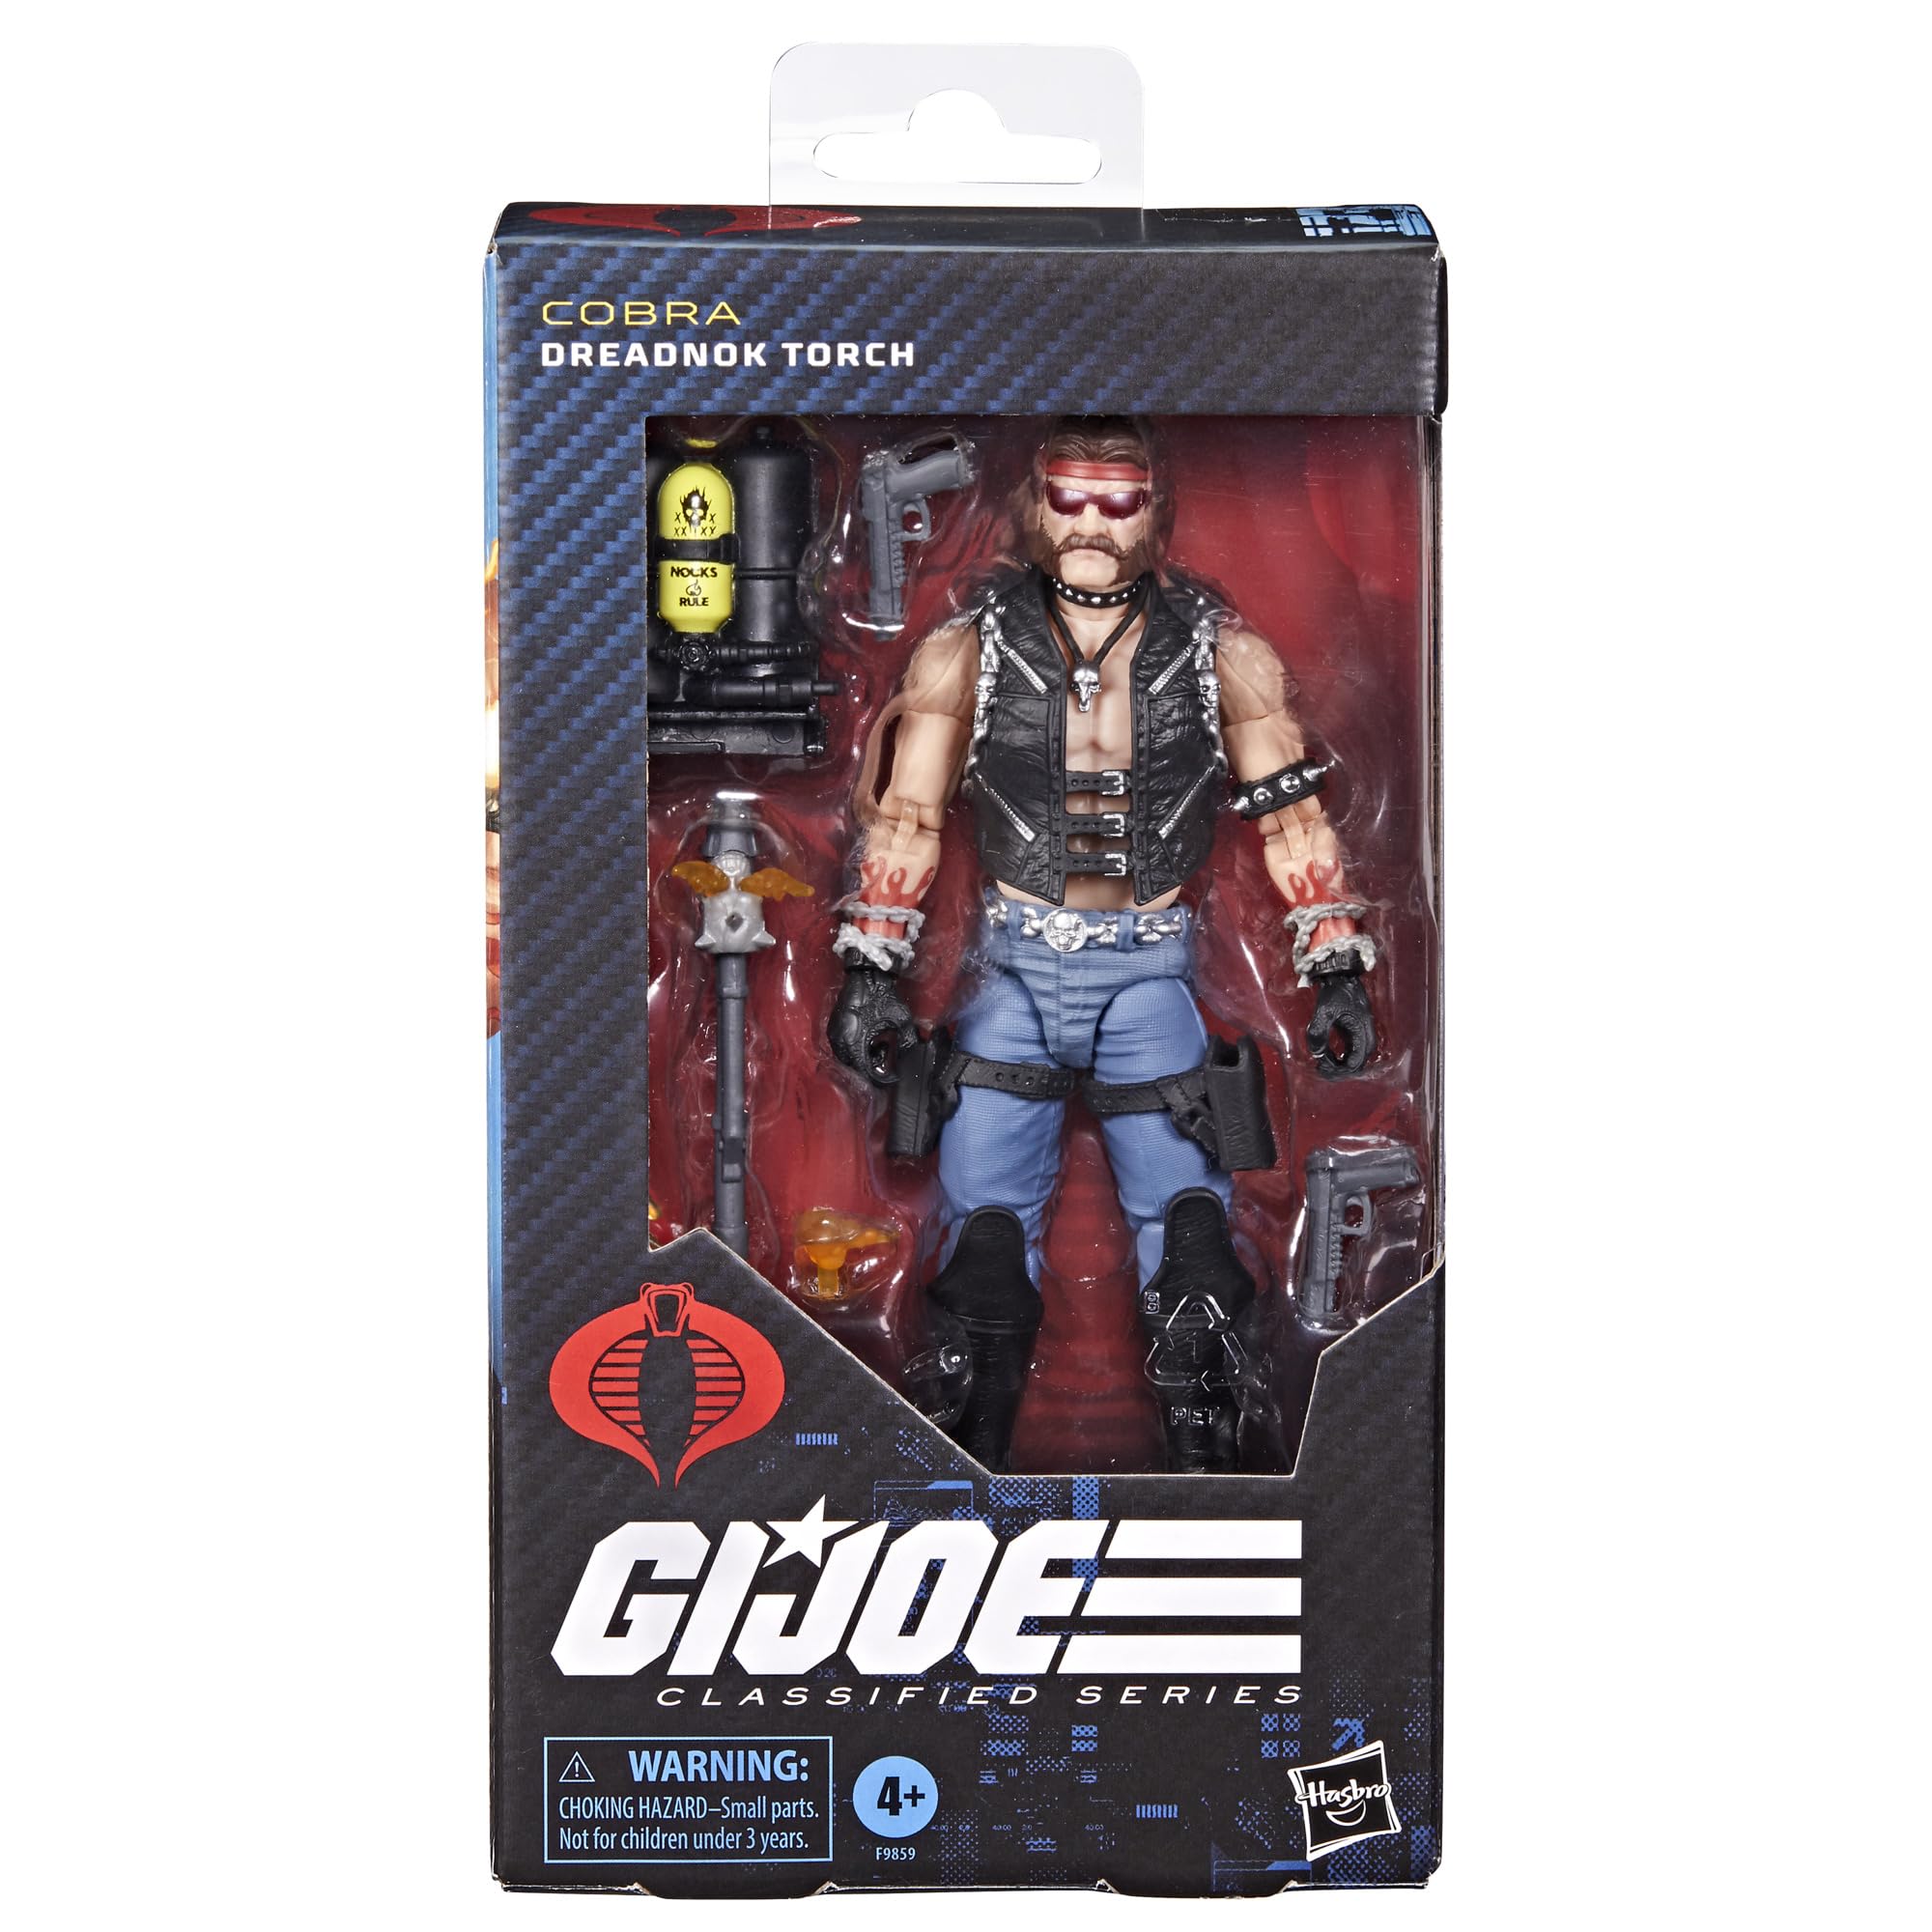 G.I. Joe Classified Series #123, Dreadnok Torch, Collectible 6-Inch Action Figure with 8 Accessories